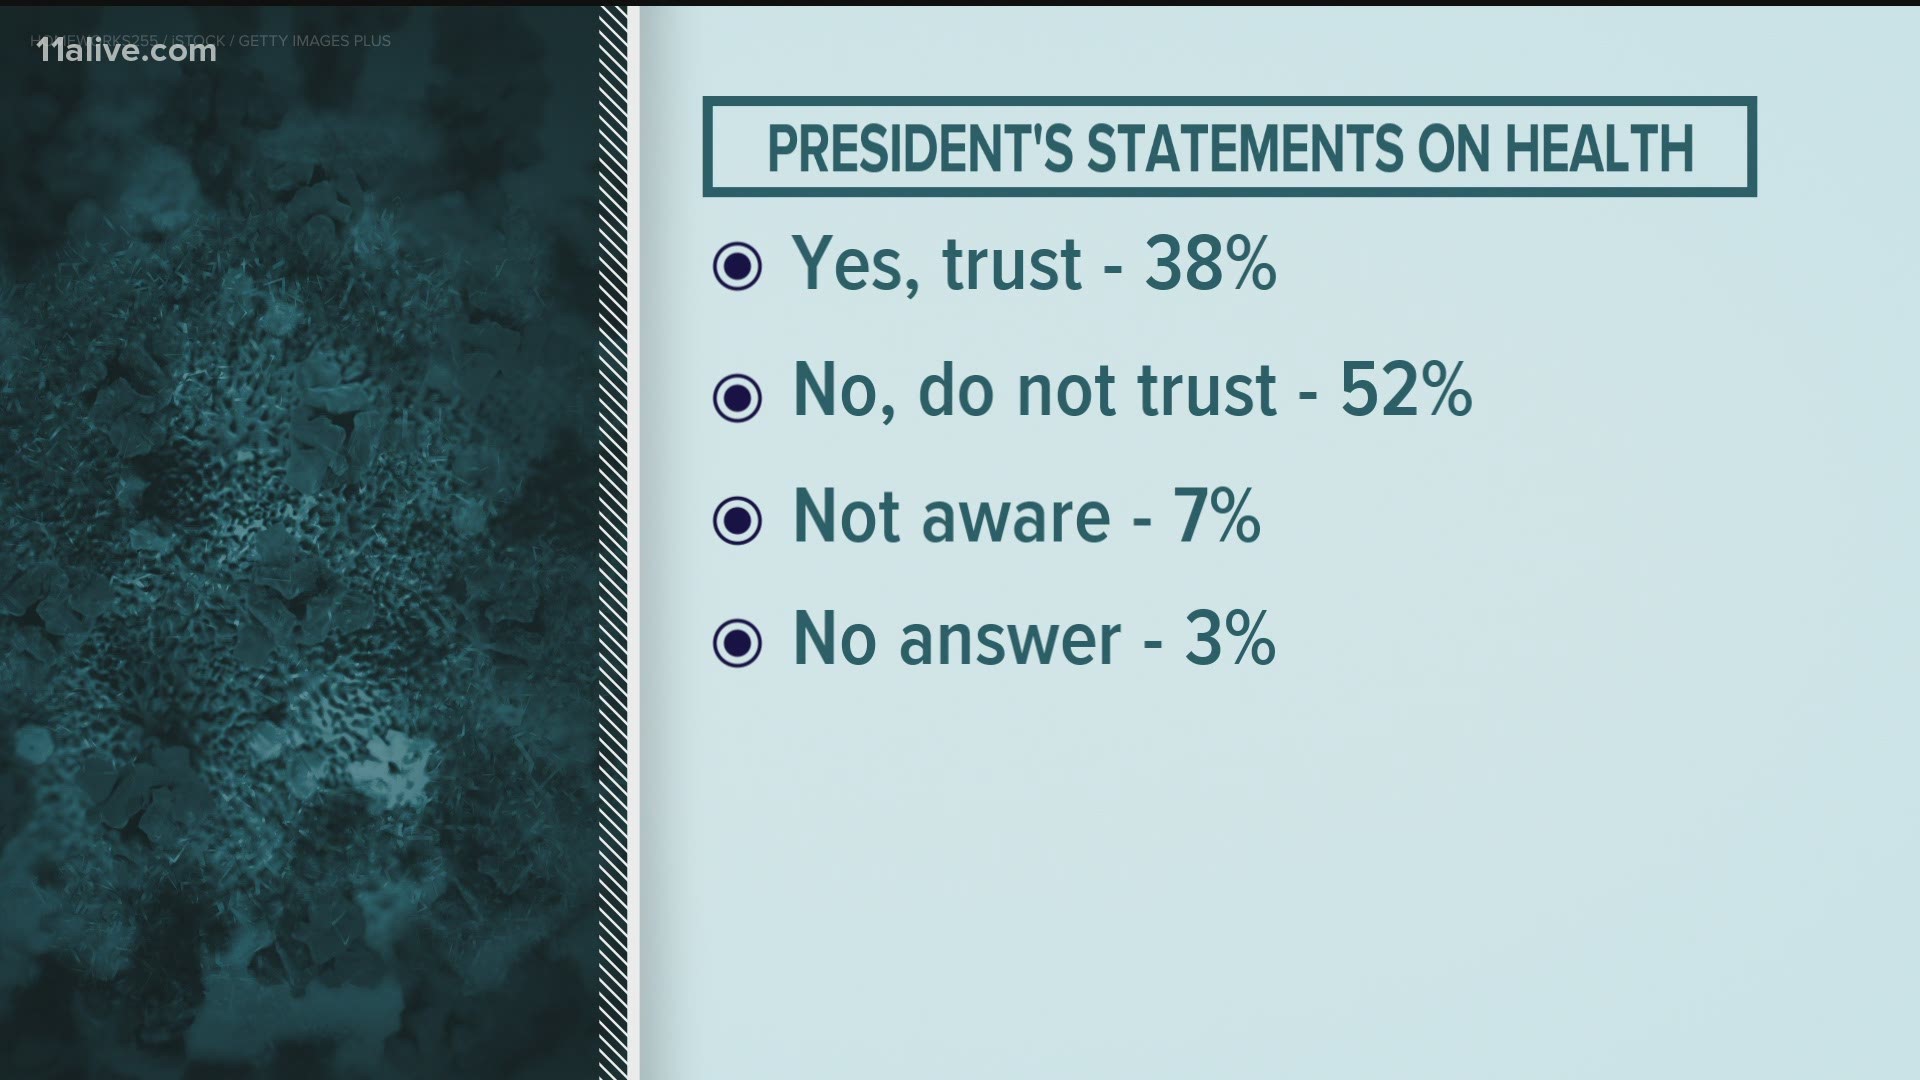 The poll was conducted a little more than a week after the president tested positive for the coronavirus.